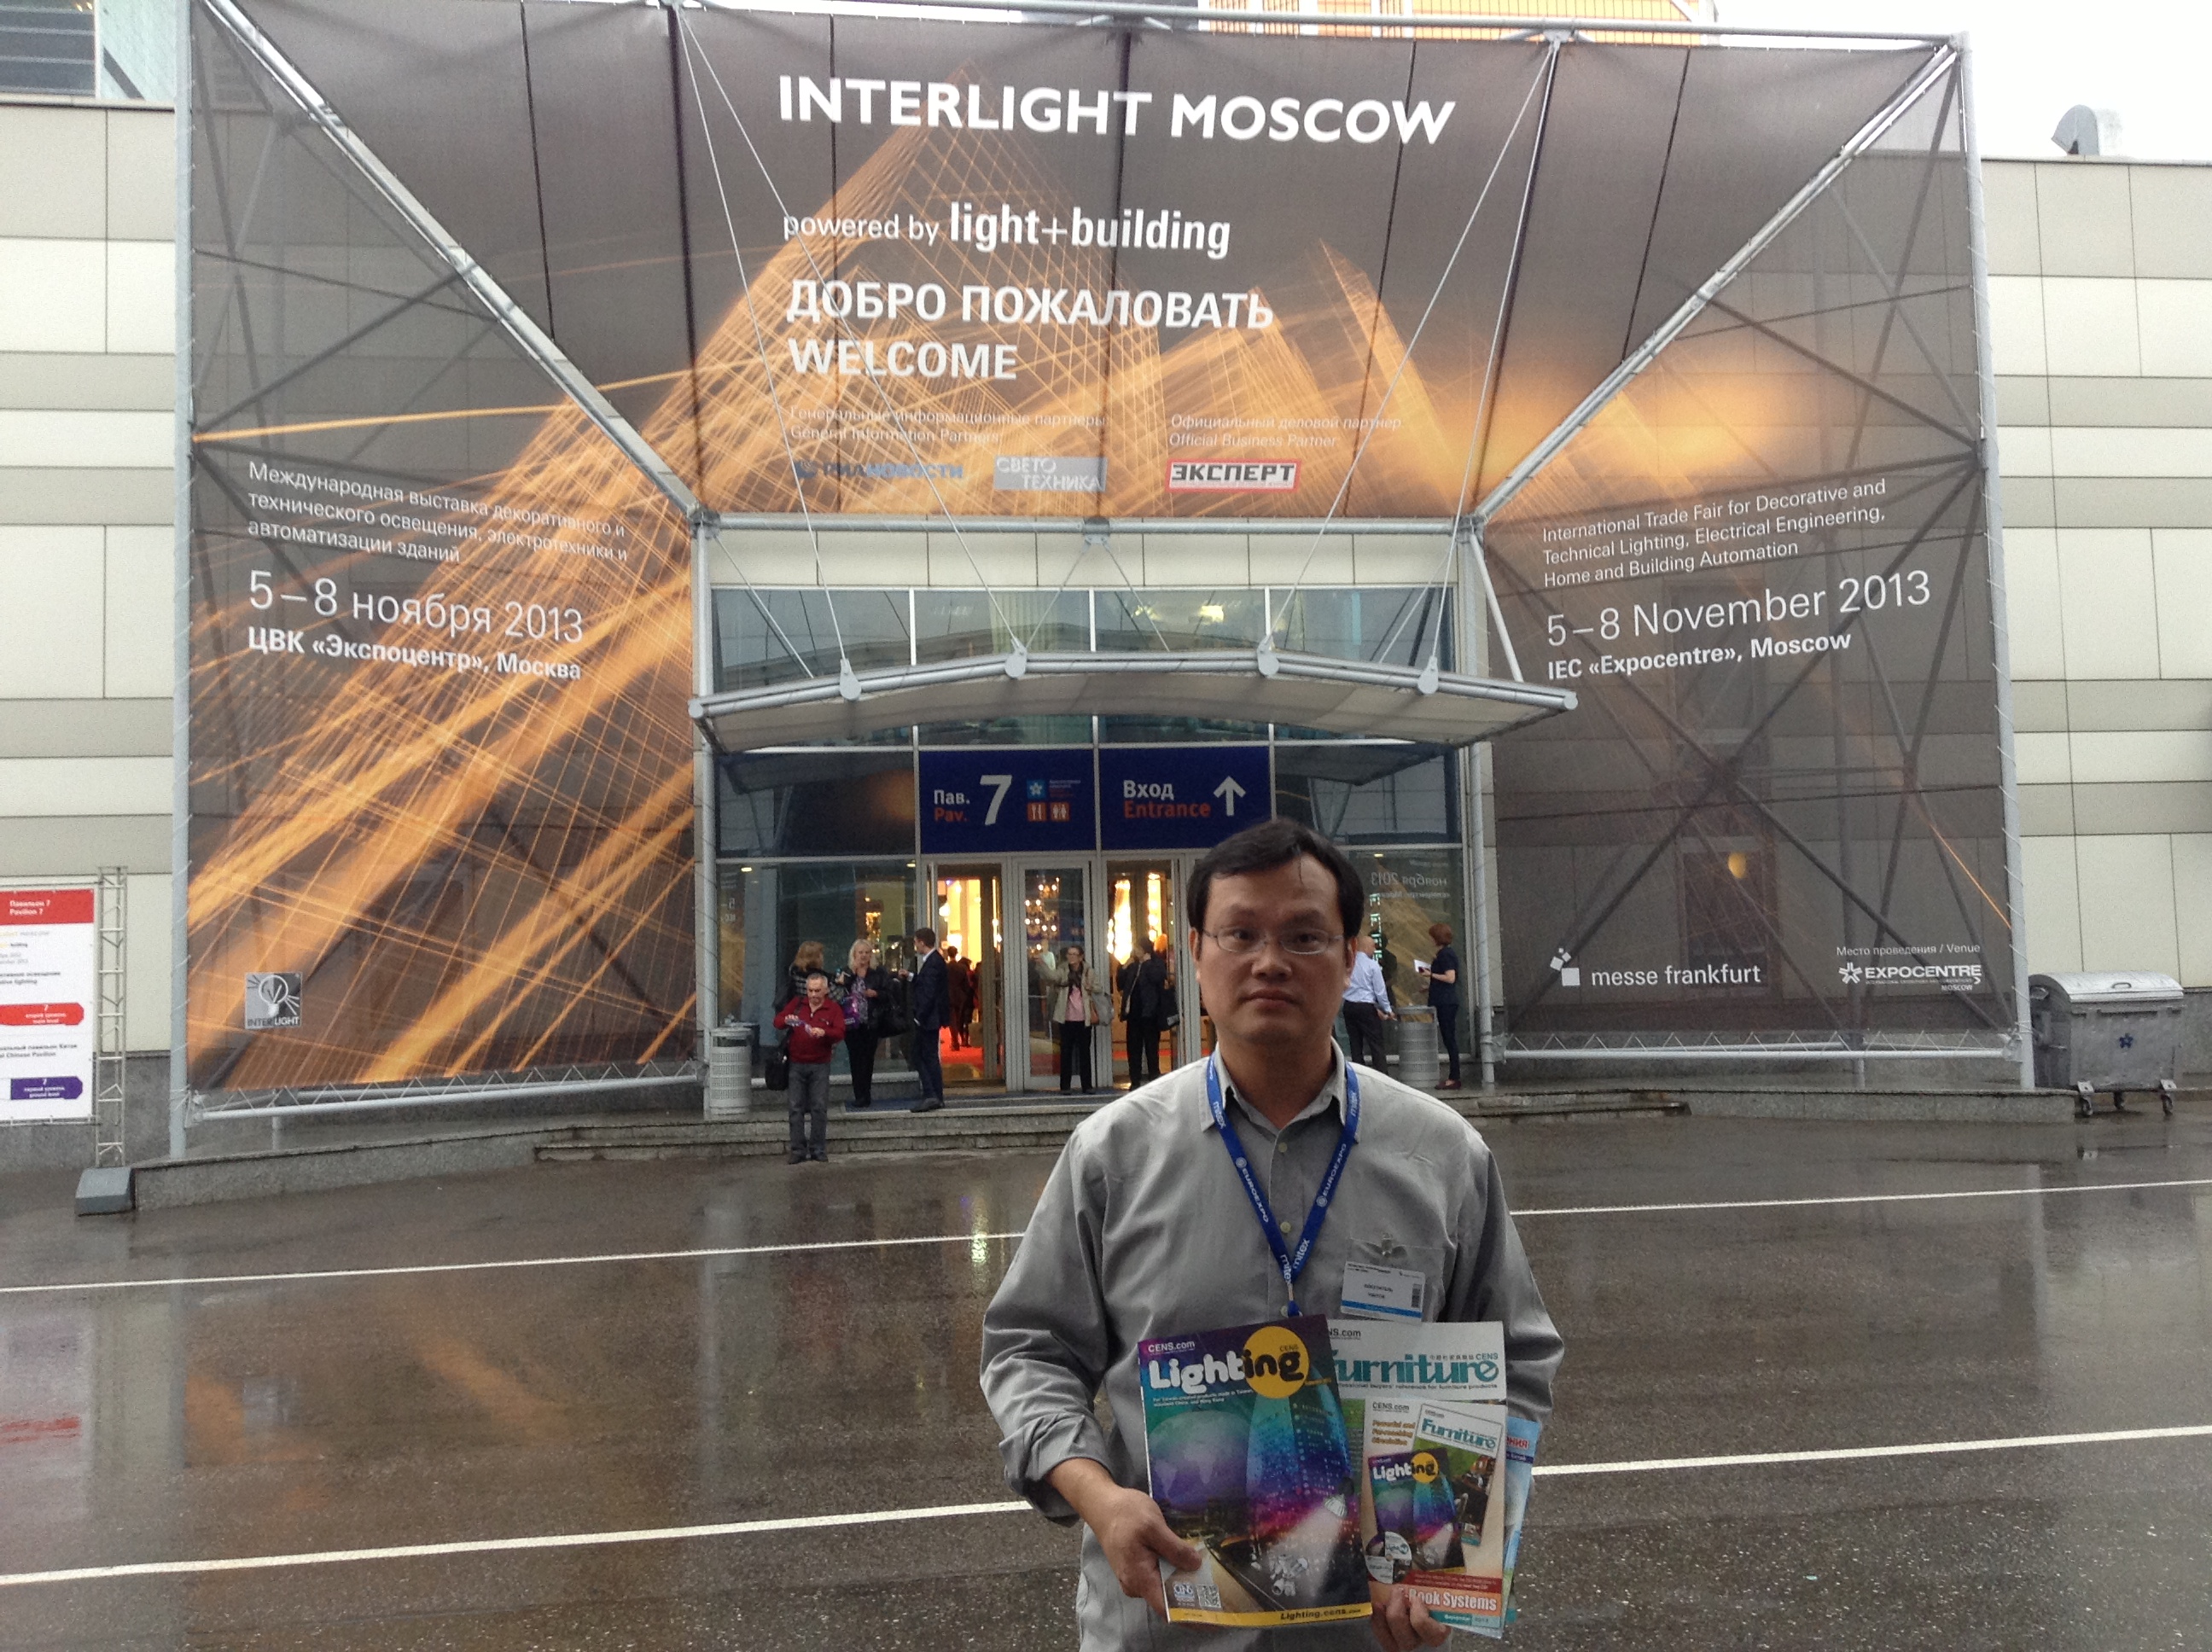 CENS representative displays CENS publications at InterLight Moscow.